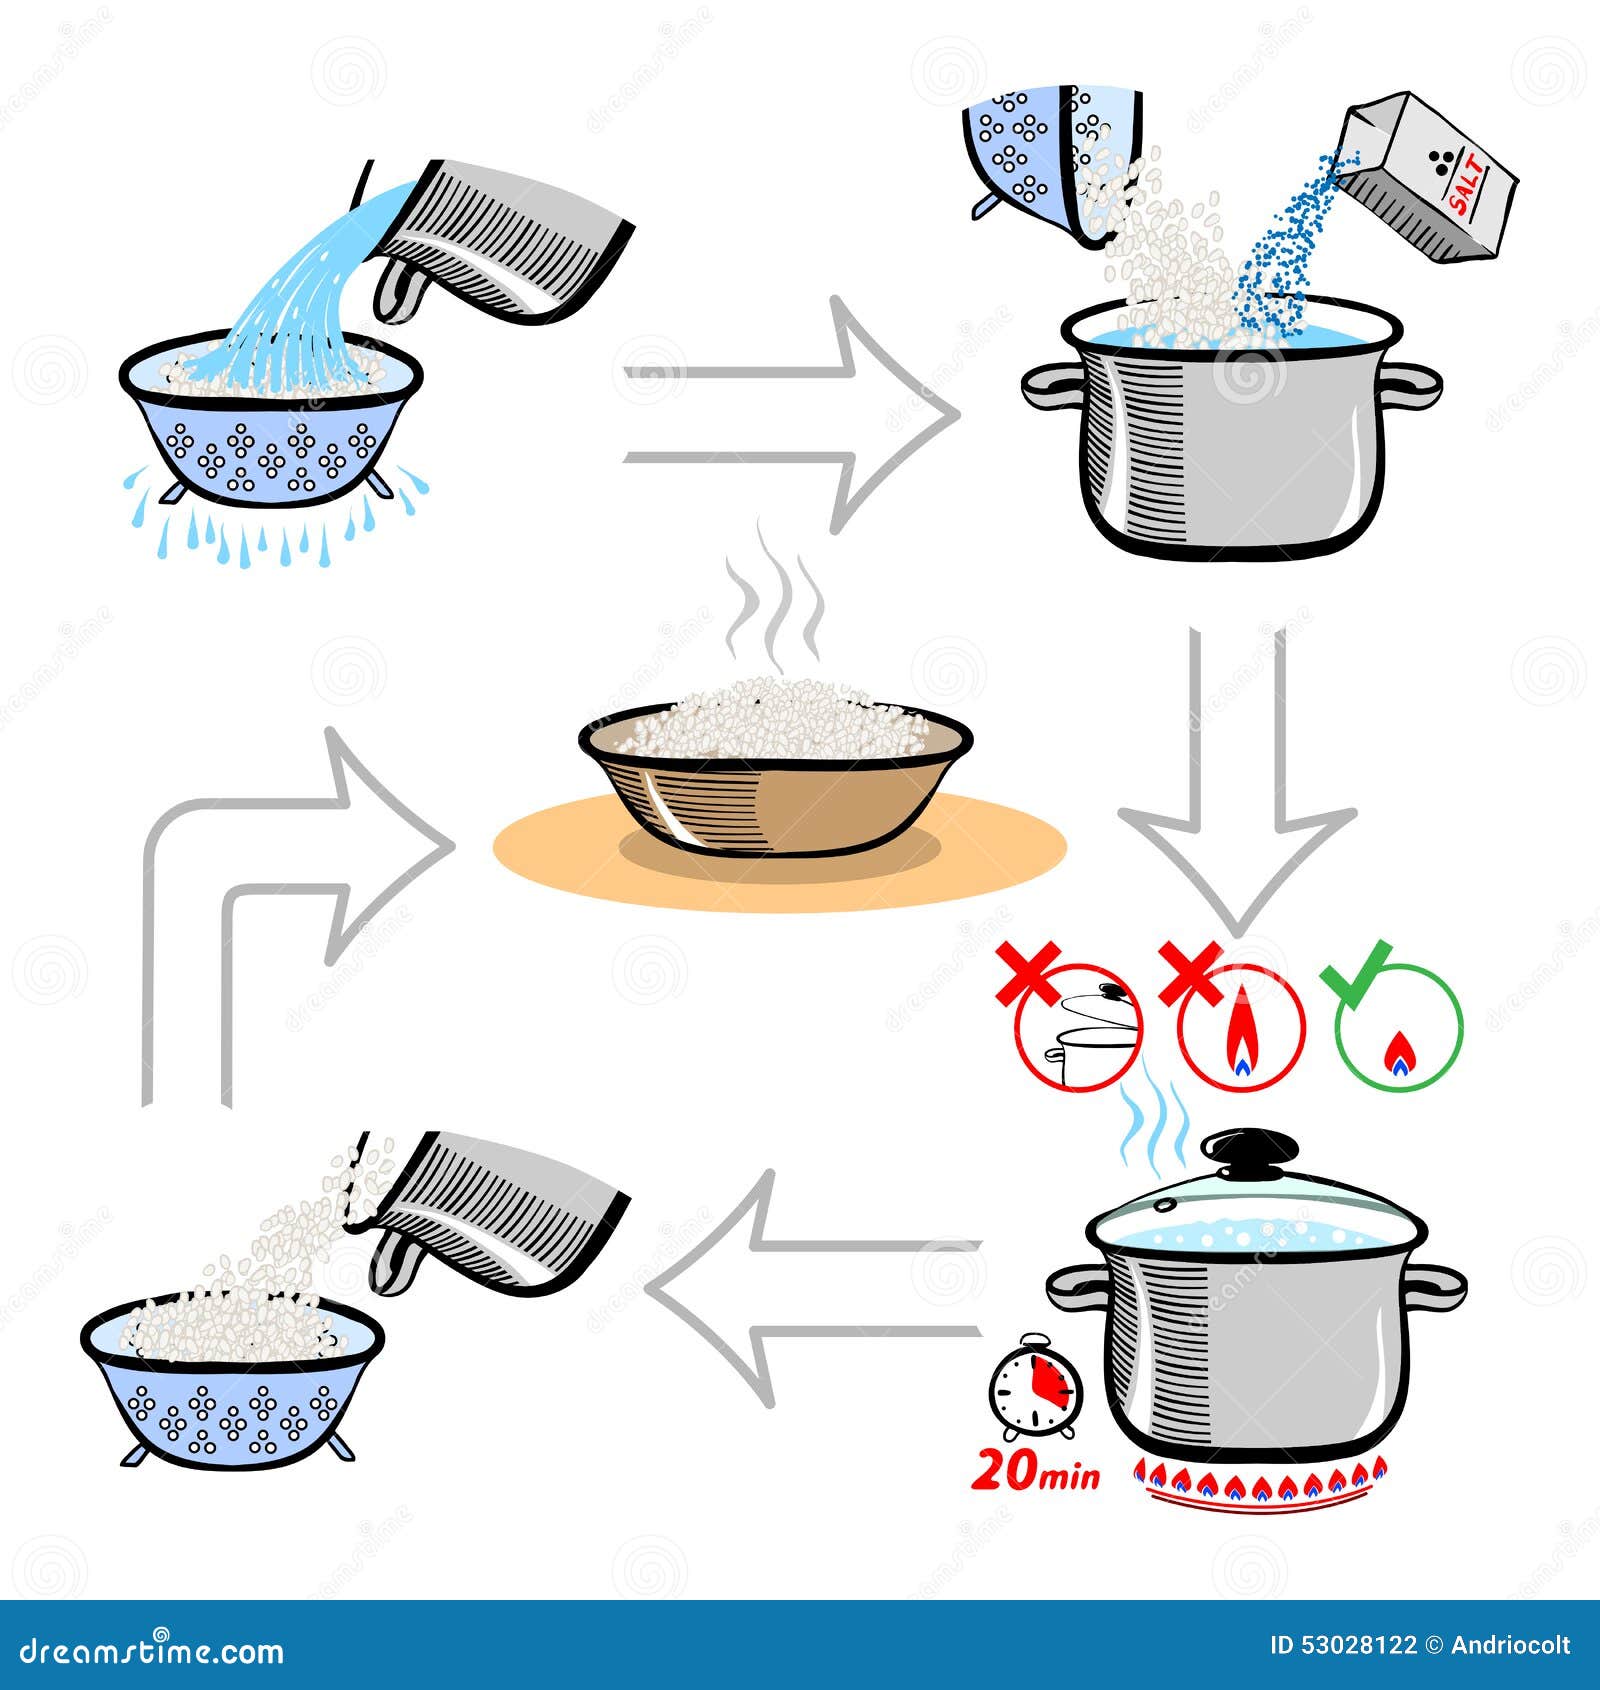 Step by Step Recipe Infographic for Cooking Rice Stock Vector